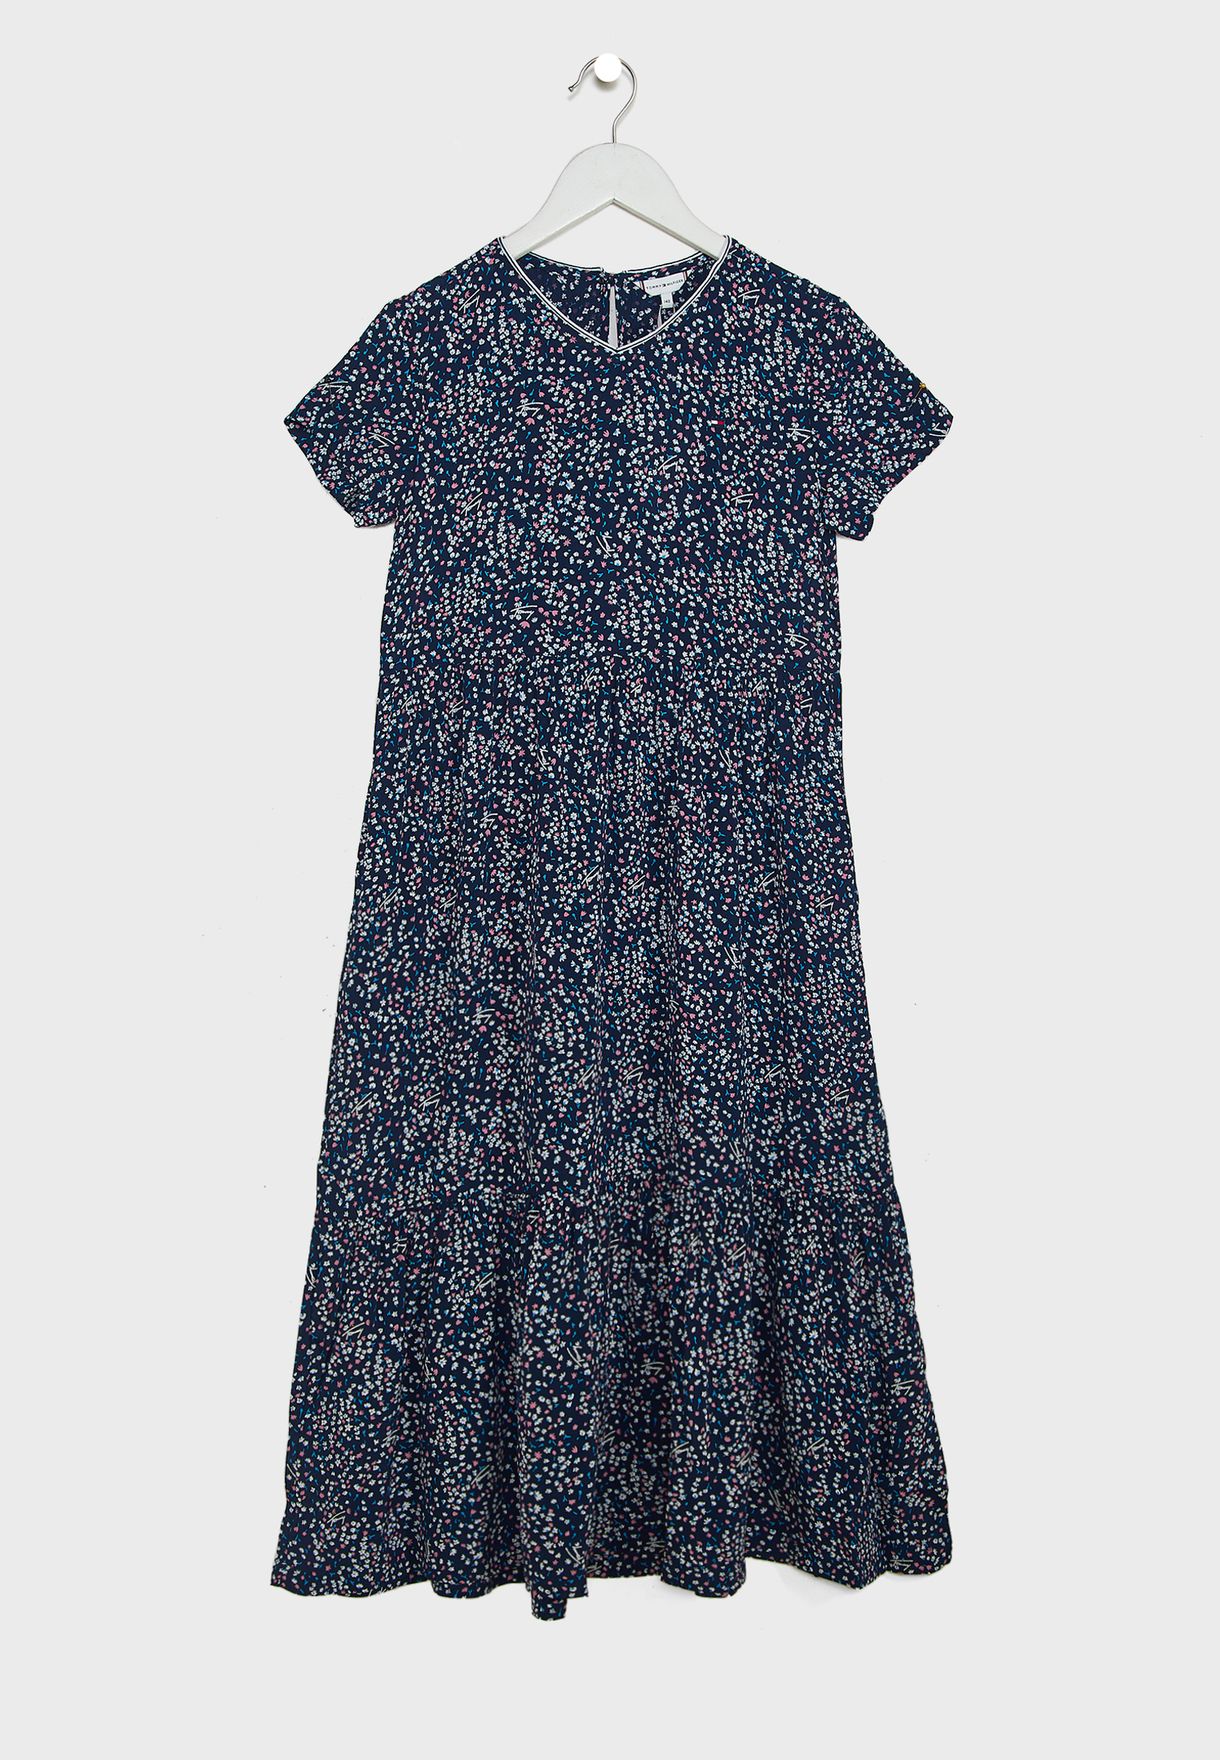 Youth Printed Dress